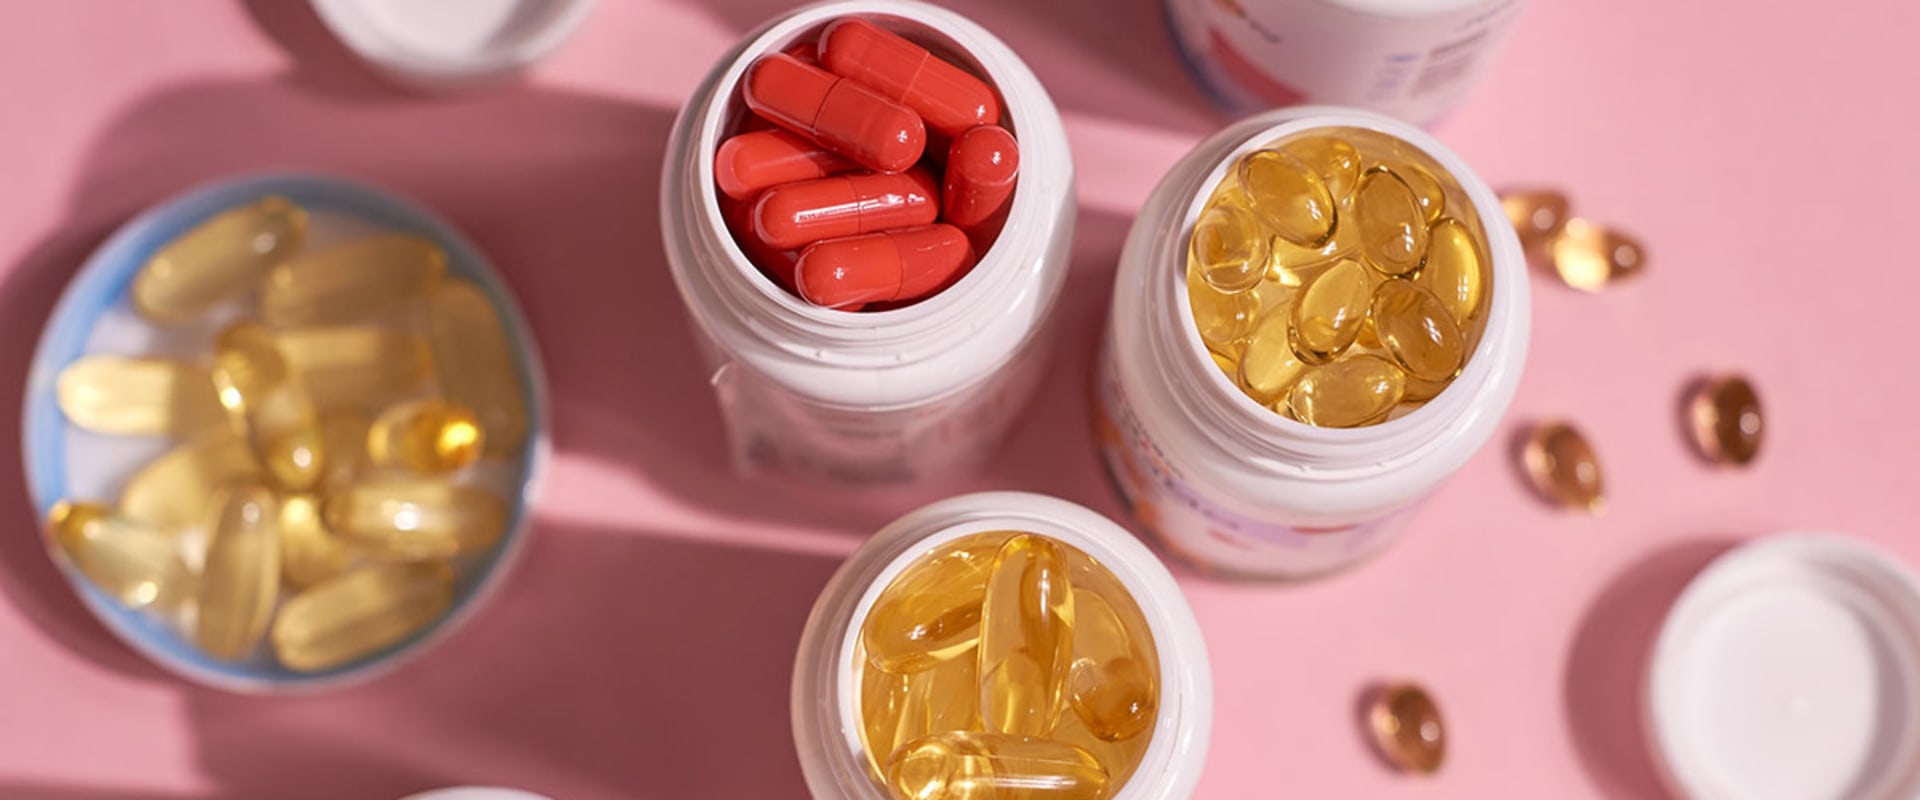 Which vitamin is best for anti-aging skin?